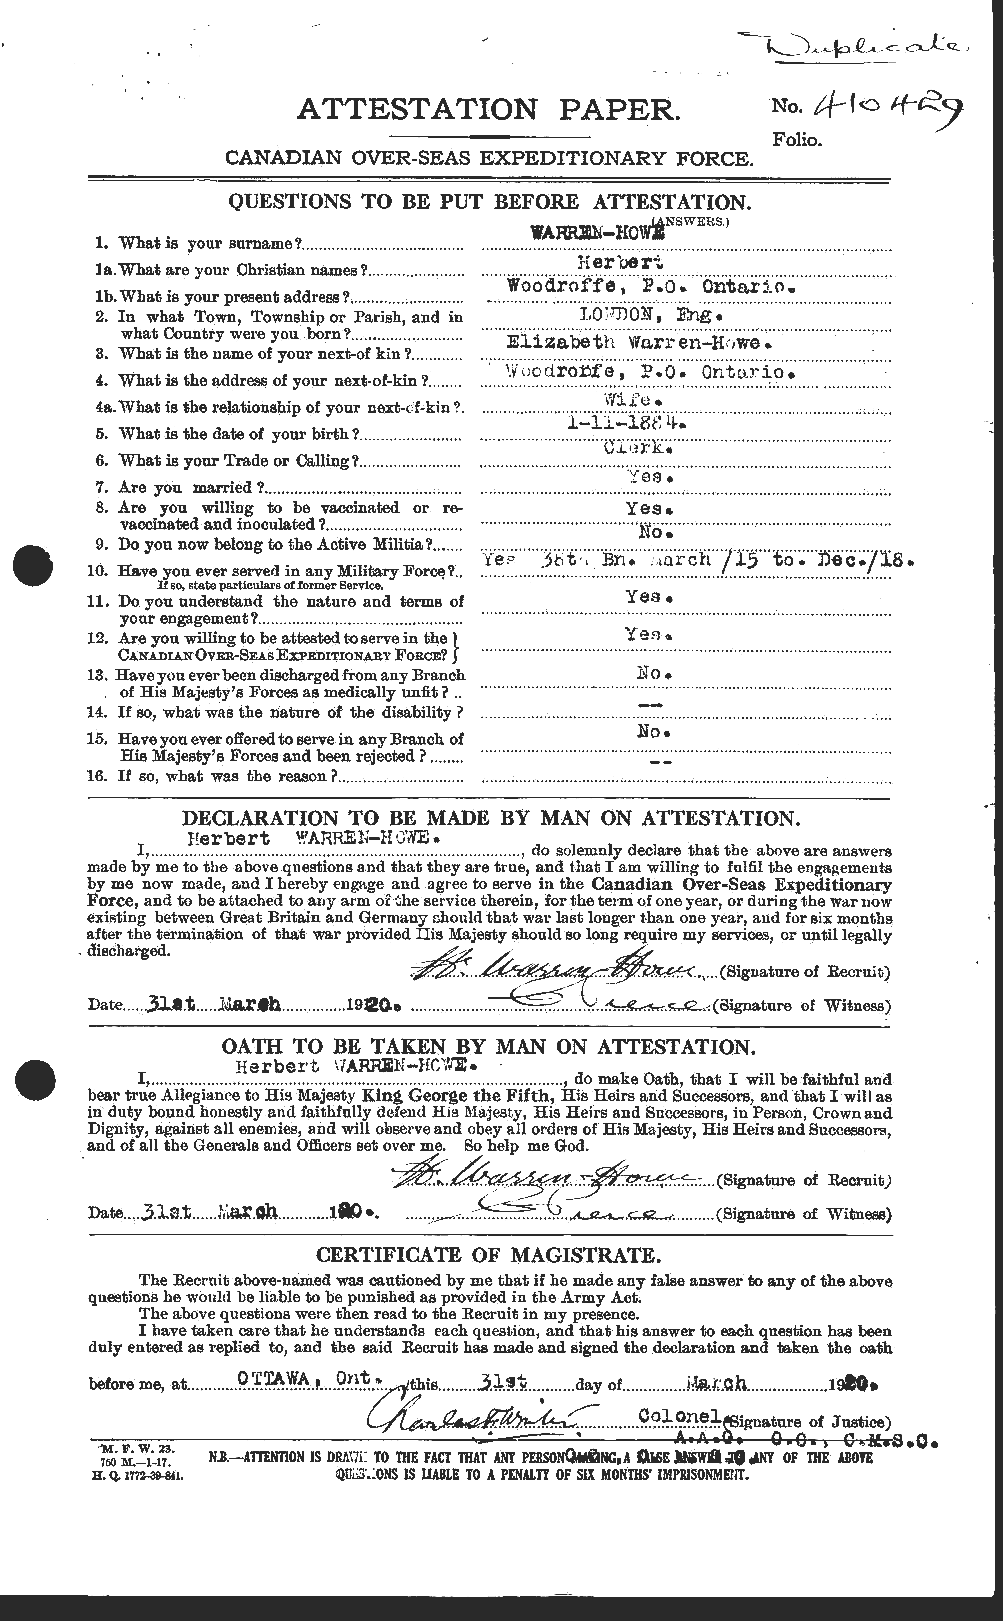 Personnel Records of the First World War - CEF 658699a